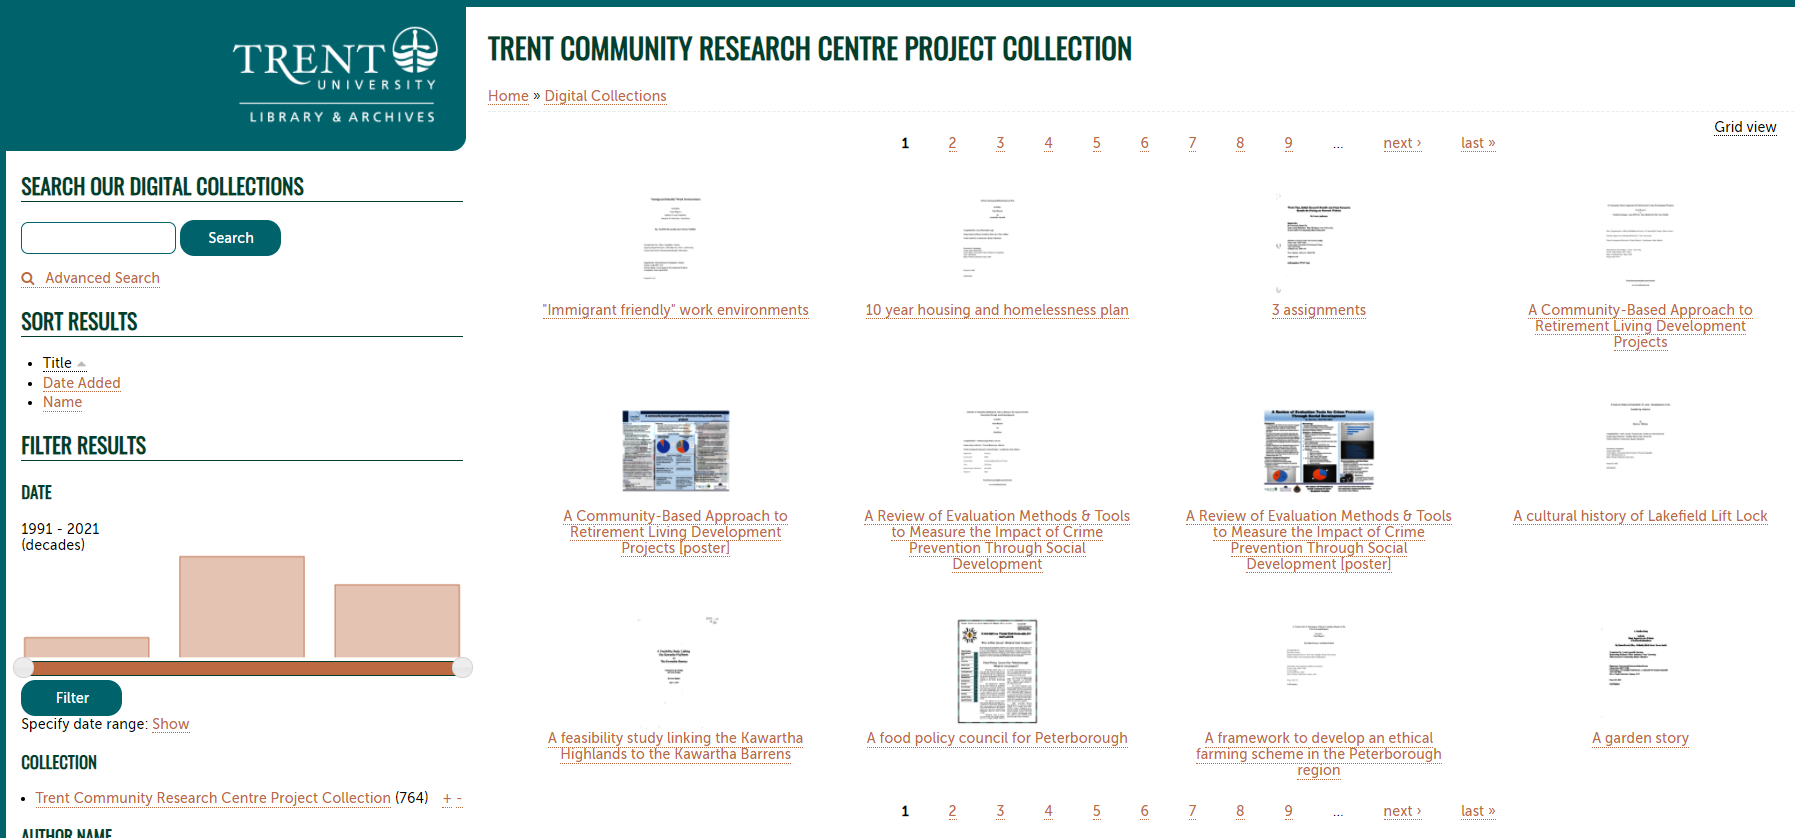 TRENT COMMUNITY RESEARCH CENTRE PROJECT COLLECTION